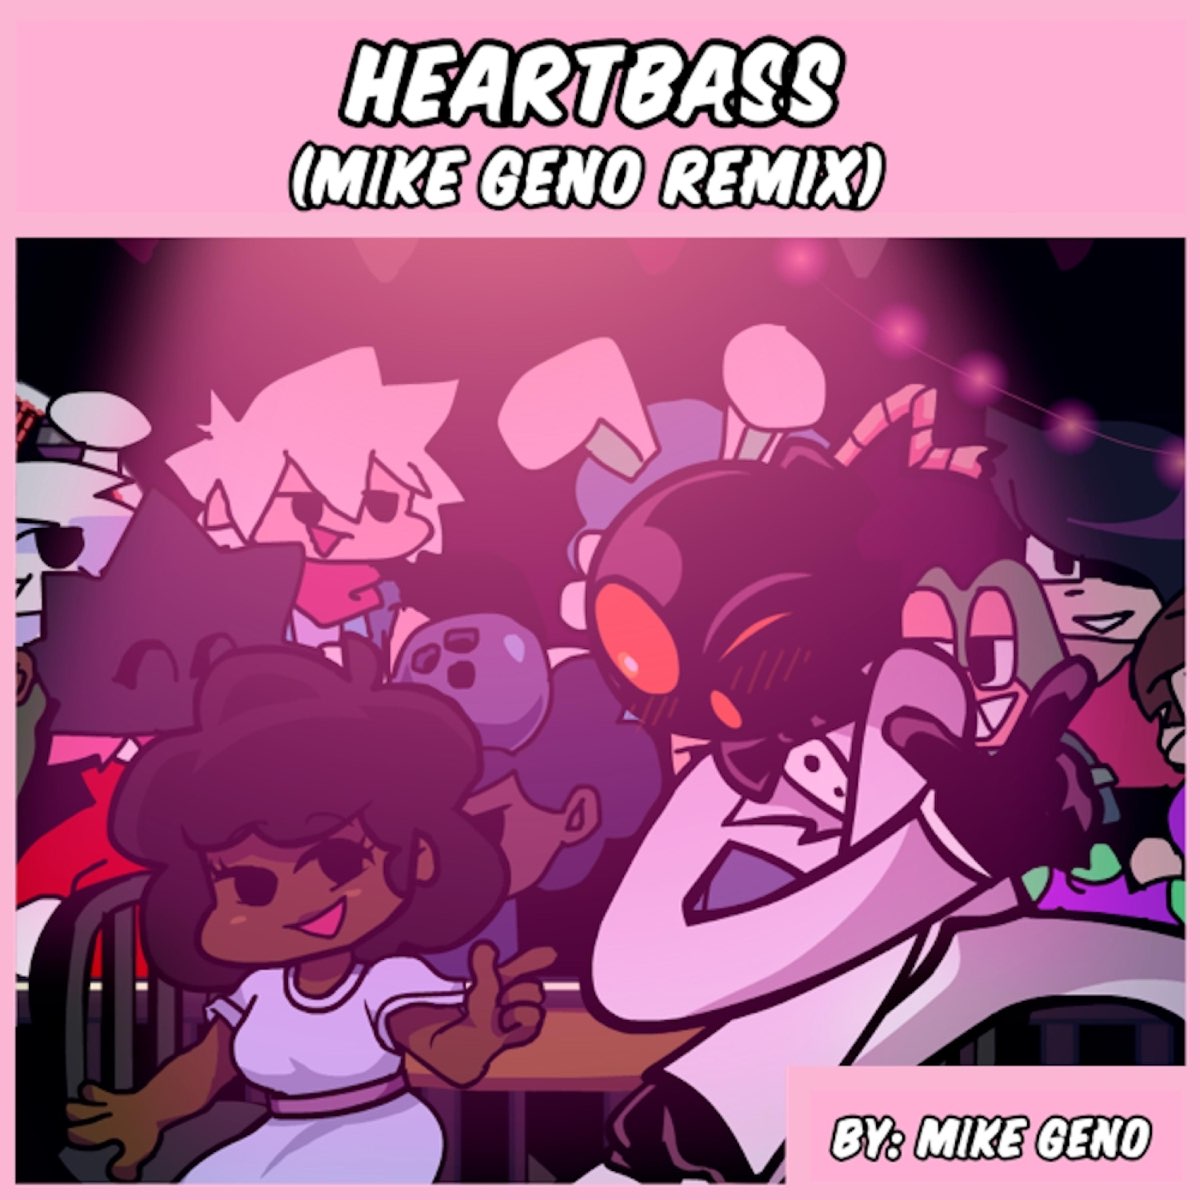 ‎friday Night Funkin The Date Week Heartbass Mike Geno Remix 6579